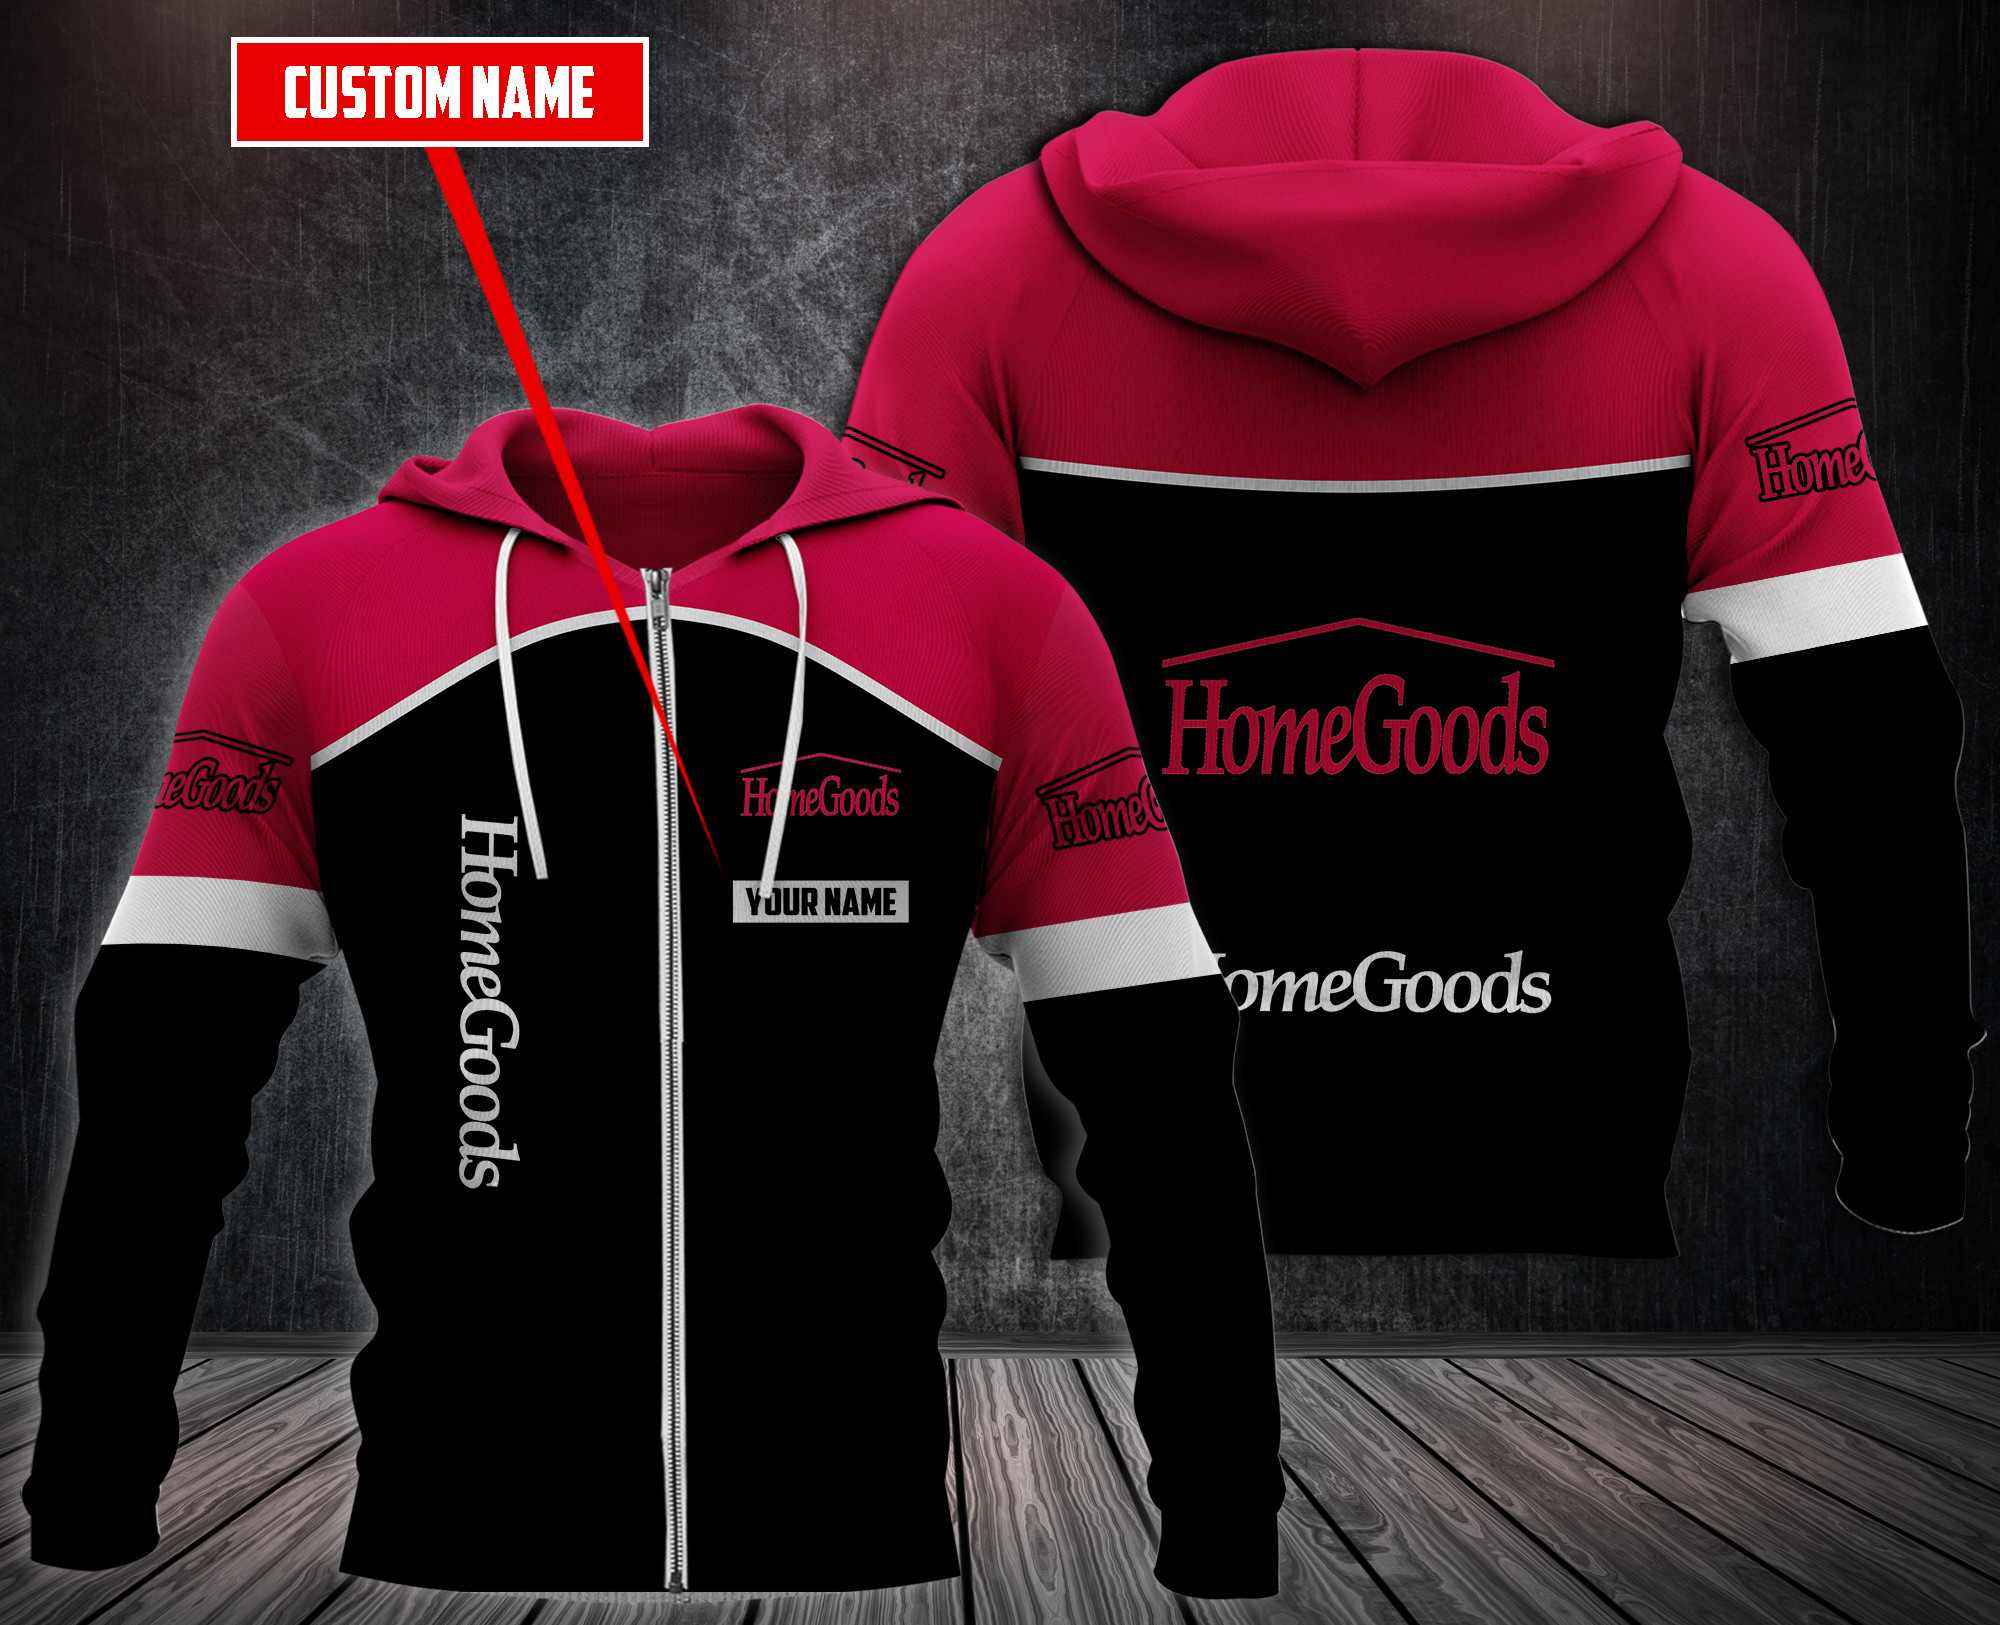 Choose the right hoodies for you on our boxboxshirt and ethershirt websites in 2022 62